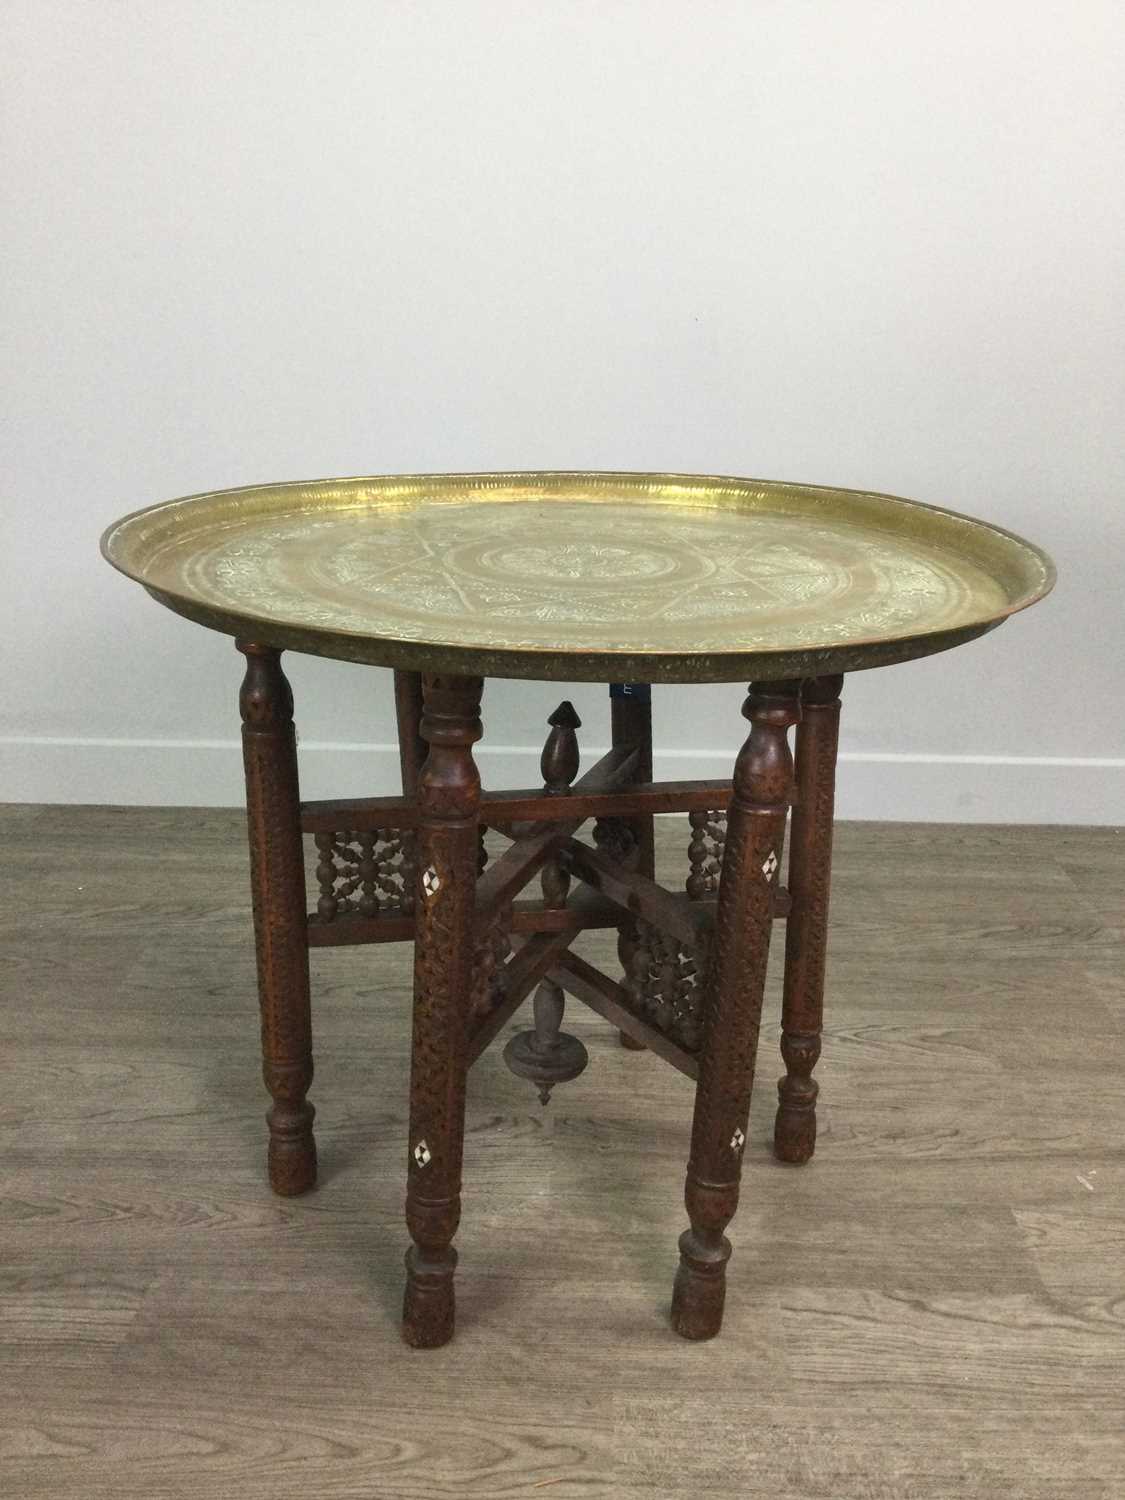 Lot 732 - AN INDIAN BRASS TABLE ON FOLDING STAND